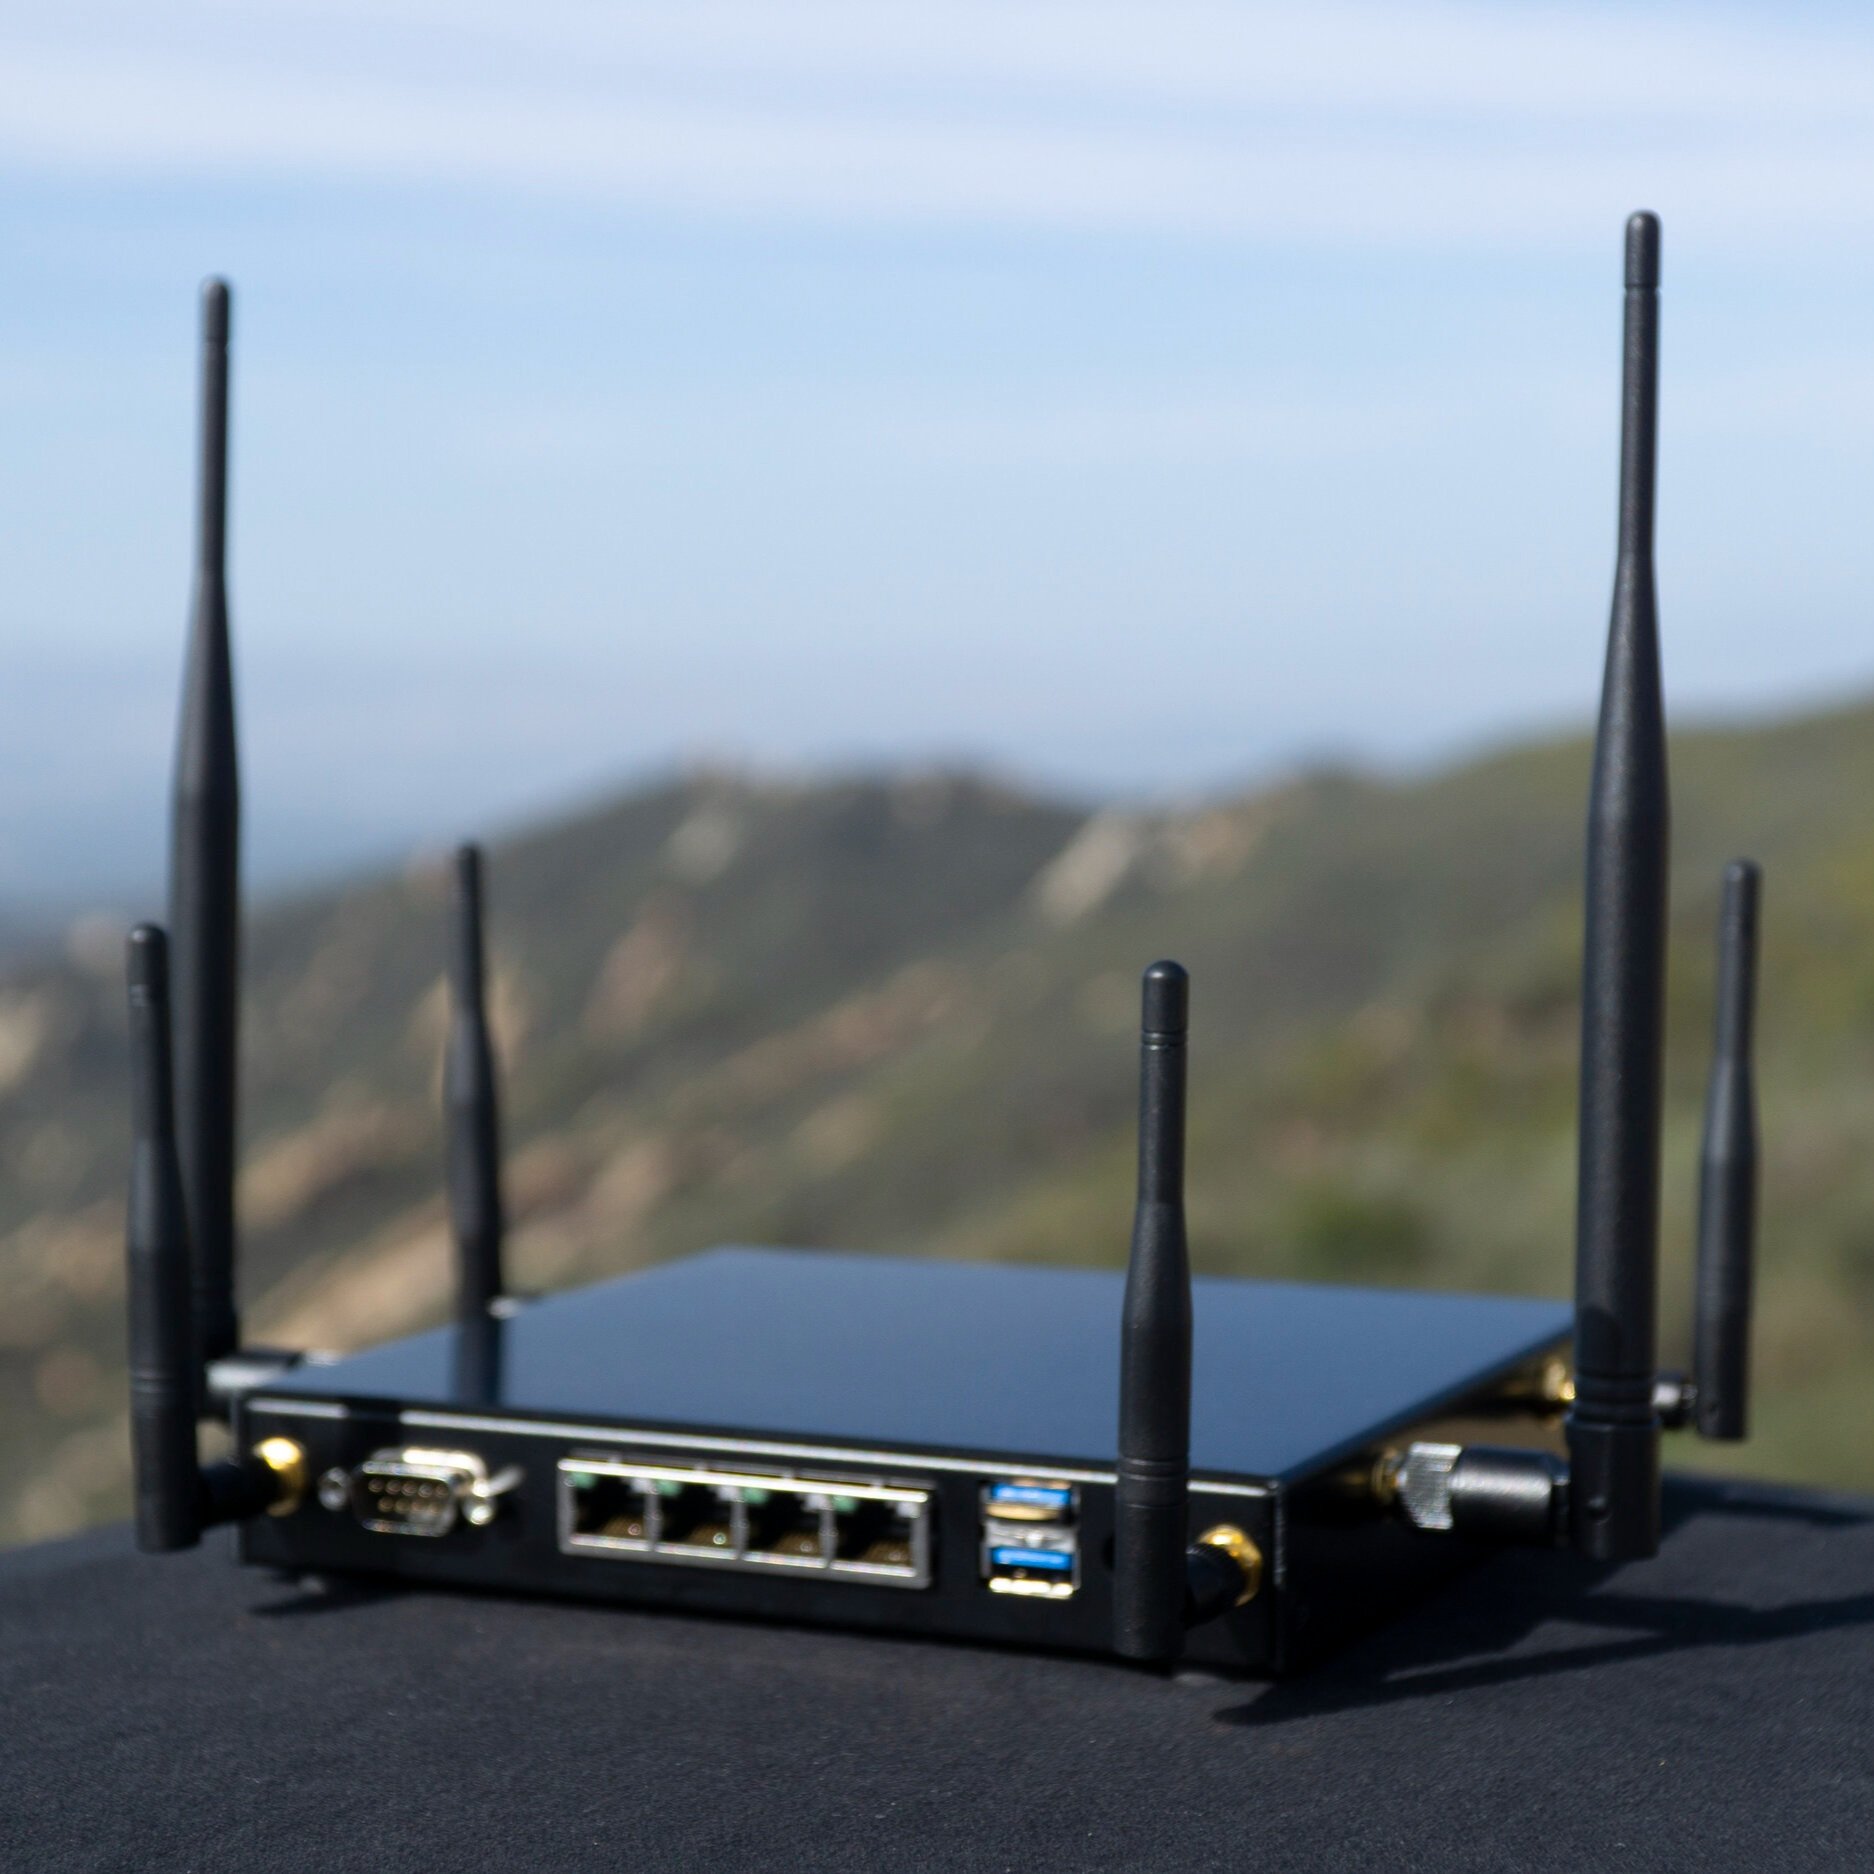 NetNinja Blacksite Edition - A bastion host for your MDF closet, plug into multiple layers of your network to monitor your network remotely with the built in cellular modem.